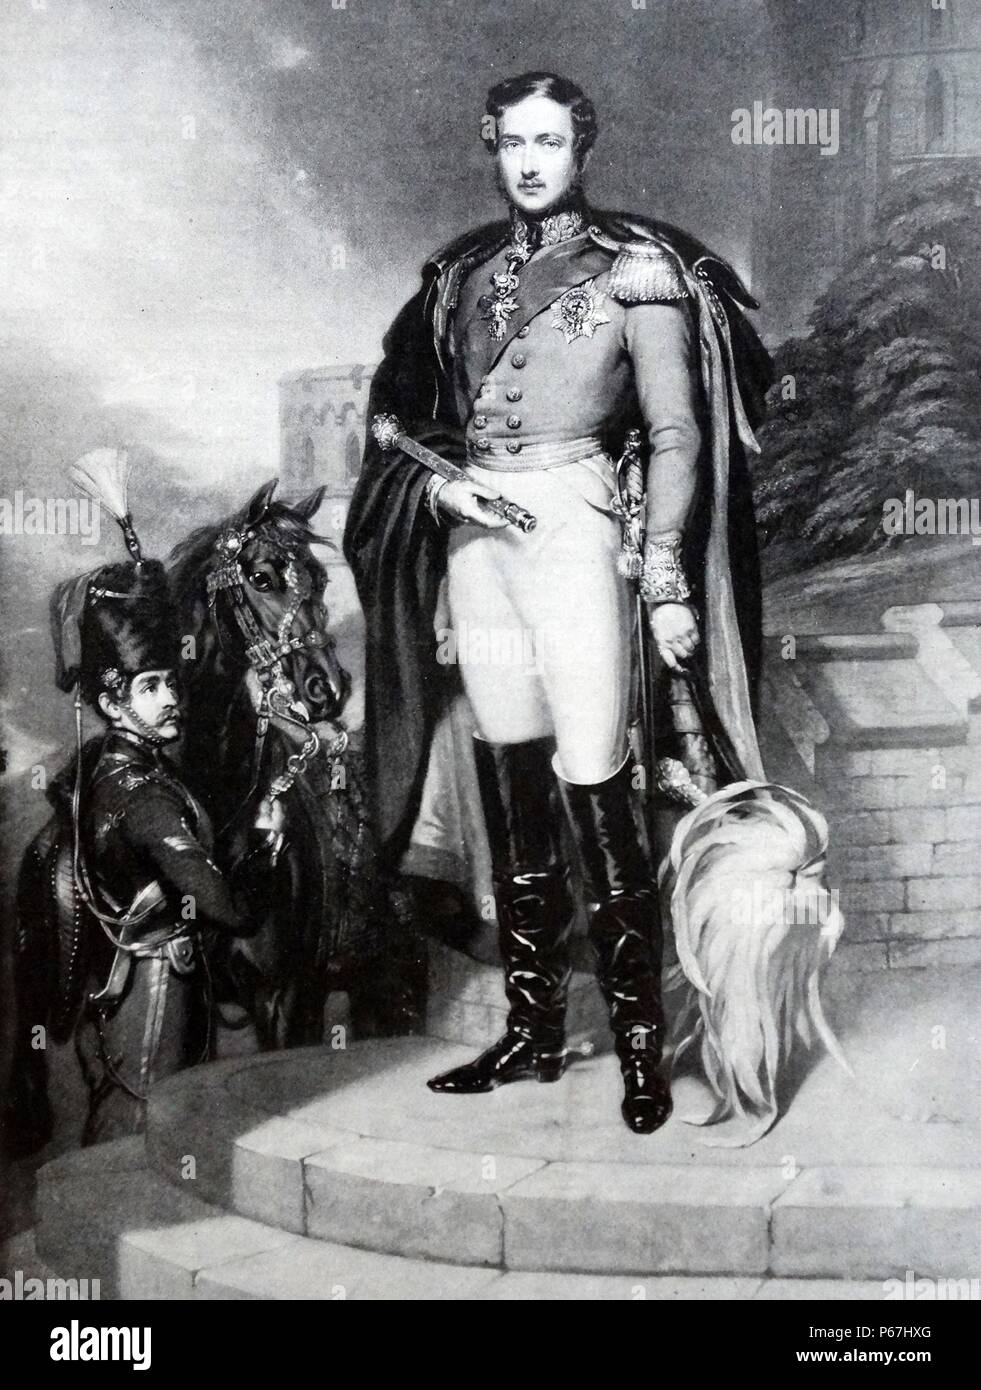 Prince Albert of Saxe-Coburg and Gotha (The Prince Consort). 26 August 1819 – 14 December 1861)husband of Queen Victoria of the United Kingdom of Great Britain and Ireland. Stock Photo